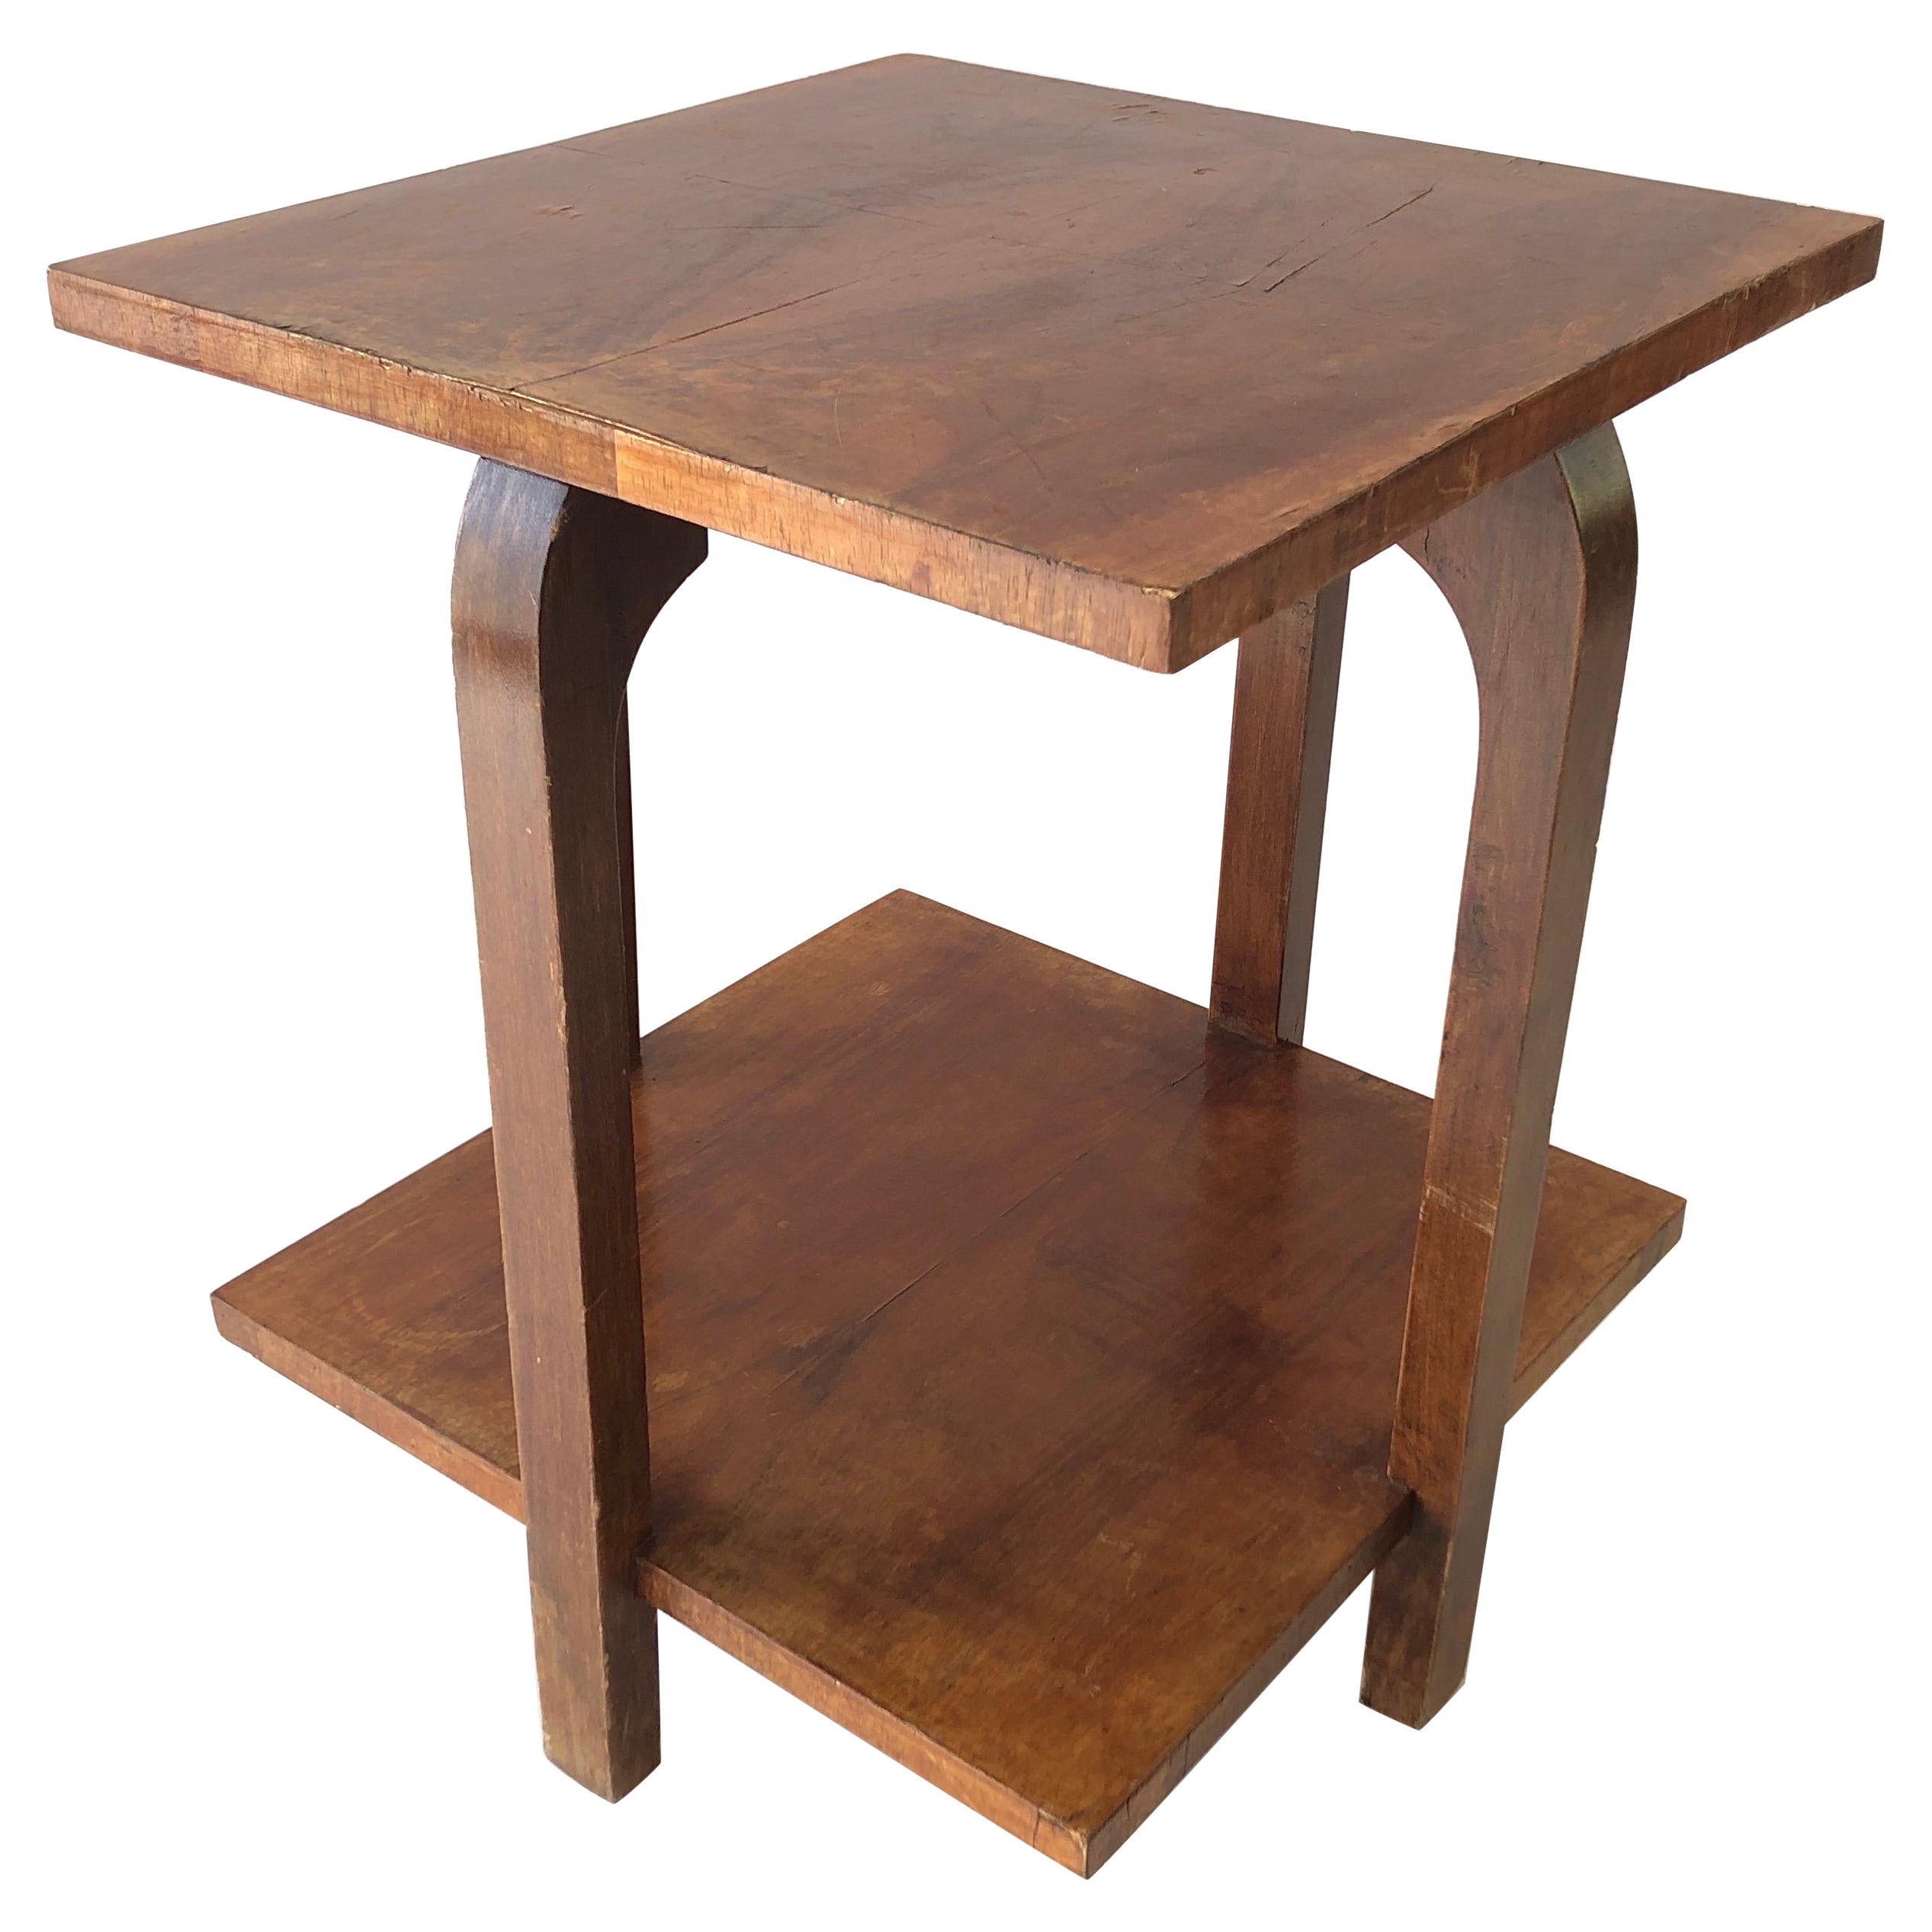 Art Deco Square Wood Corner or End Table, 1940s, Made in Italy For Sale